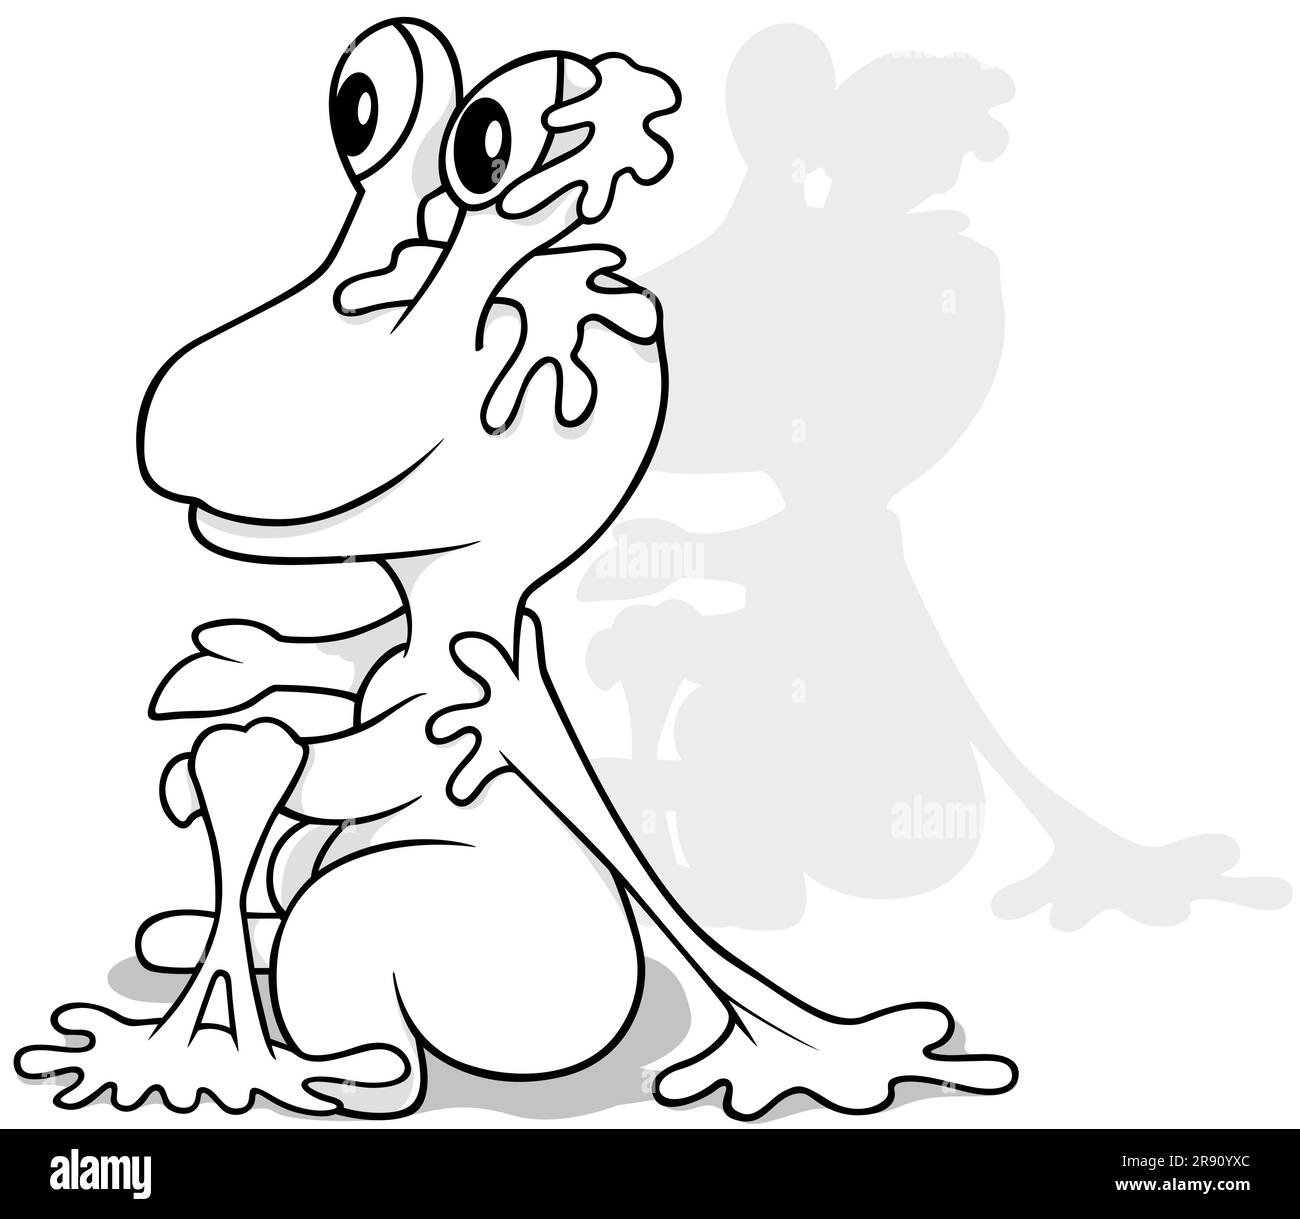 Drawing of a Garbage Monster Stock Vector